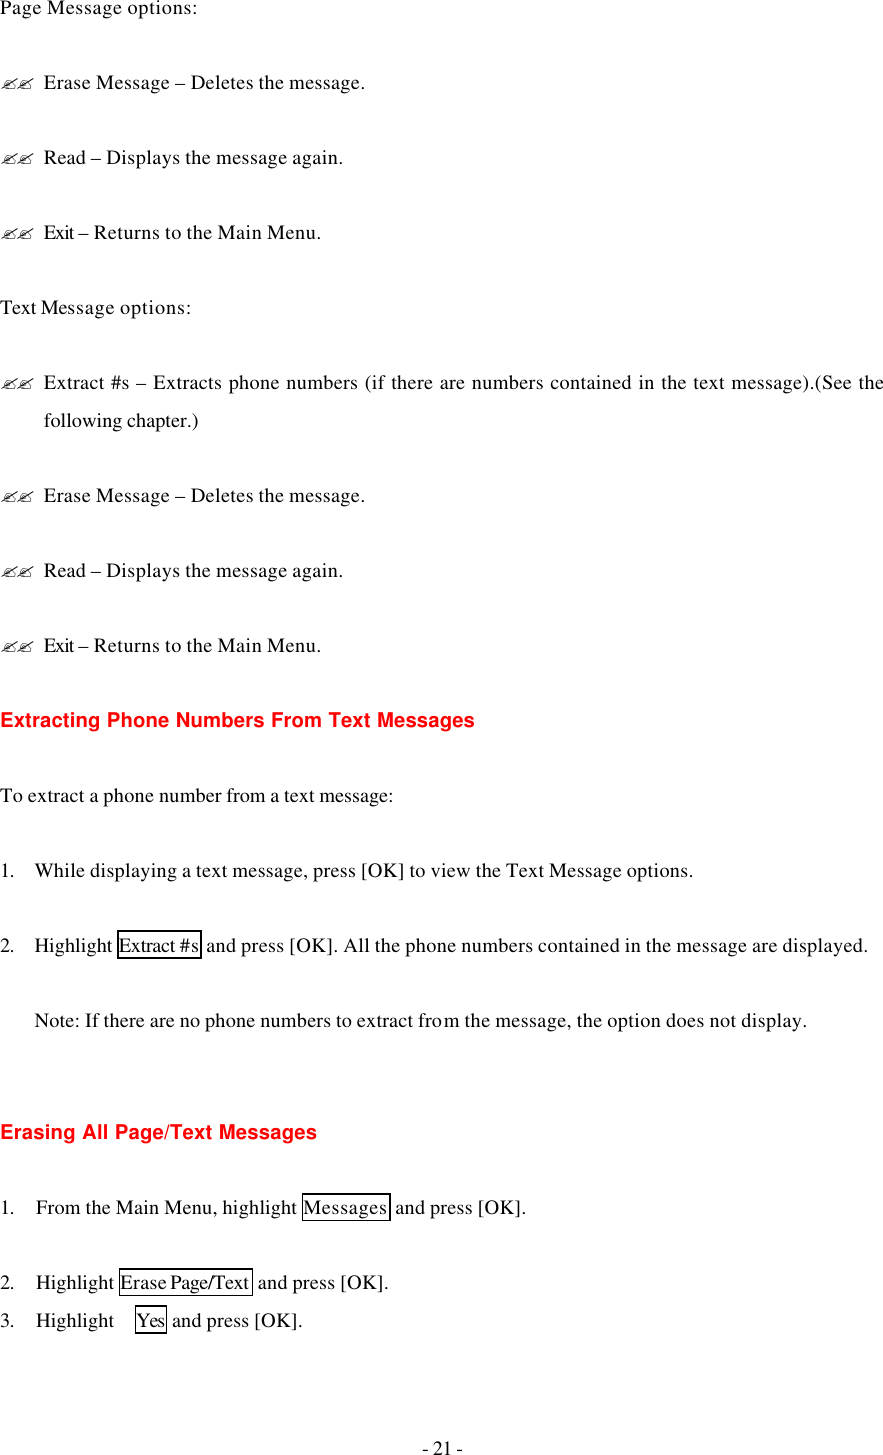 - 21 - Page Message options:  ?? Erase Message – Deletes the message.  ?? Read – Displays the message again.  ?? Exit – Returns to the Main Menu.  Text Message options:  ?? Extract #s – Extracts phone numbers (if there are numbers contained in the text message).(See the following chapter.)  ?? Erase Message – Deletes the message.  ?? Read – Displays the message again.  ?? Exit – Returns to the Main Menu.  Extracting Phone Numbers From Text Messages  To extract a phone number from a text message:  1. While displaying a text message, press [OK] to view the Text Message options.  2. Highlight Extract #s and press [OK]. All the phone numbers contained in the message are displayed.  Note: If there are no phone numbers to extract from the message, the option does not display.   Erasing All Page/Text Messages  1. From the Main Menu, highlight Messages  and press [OK].  2. Highlight Erase Page/Text  and press [OK]. 3. Highlight   Yes  and press [OK]. 